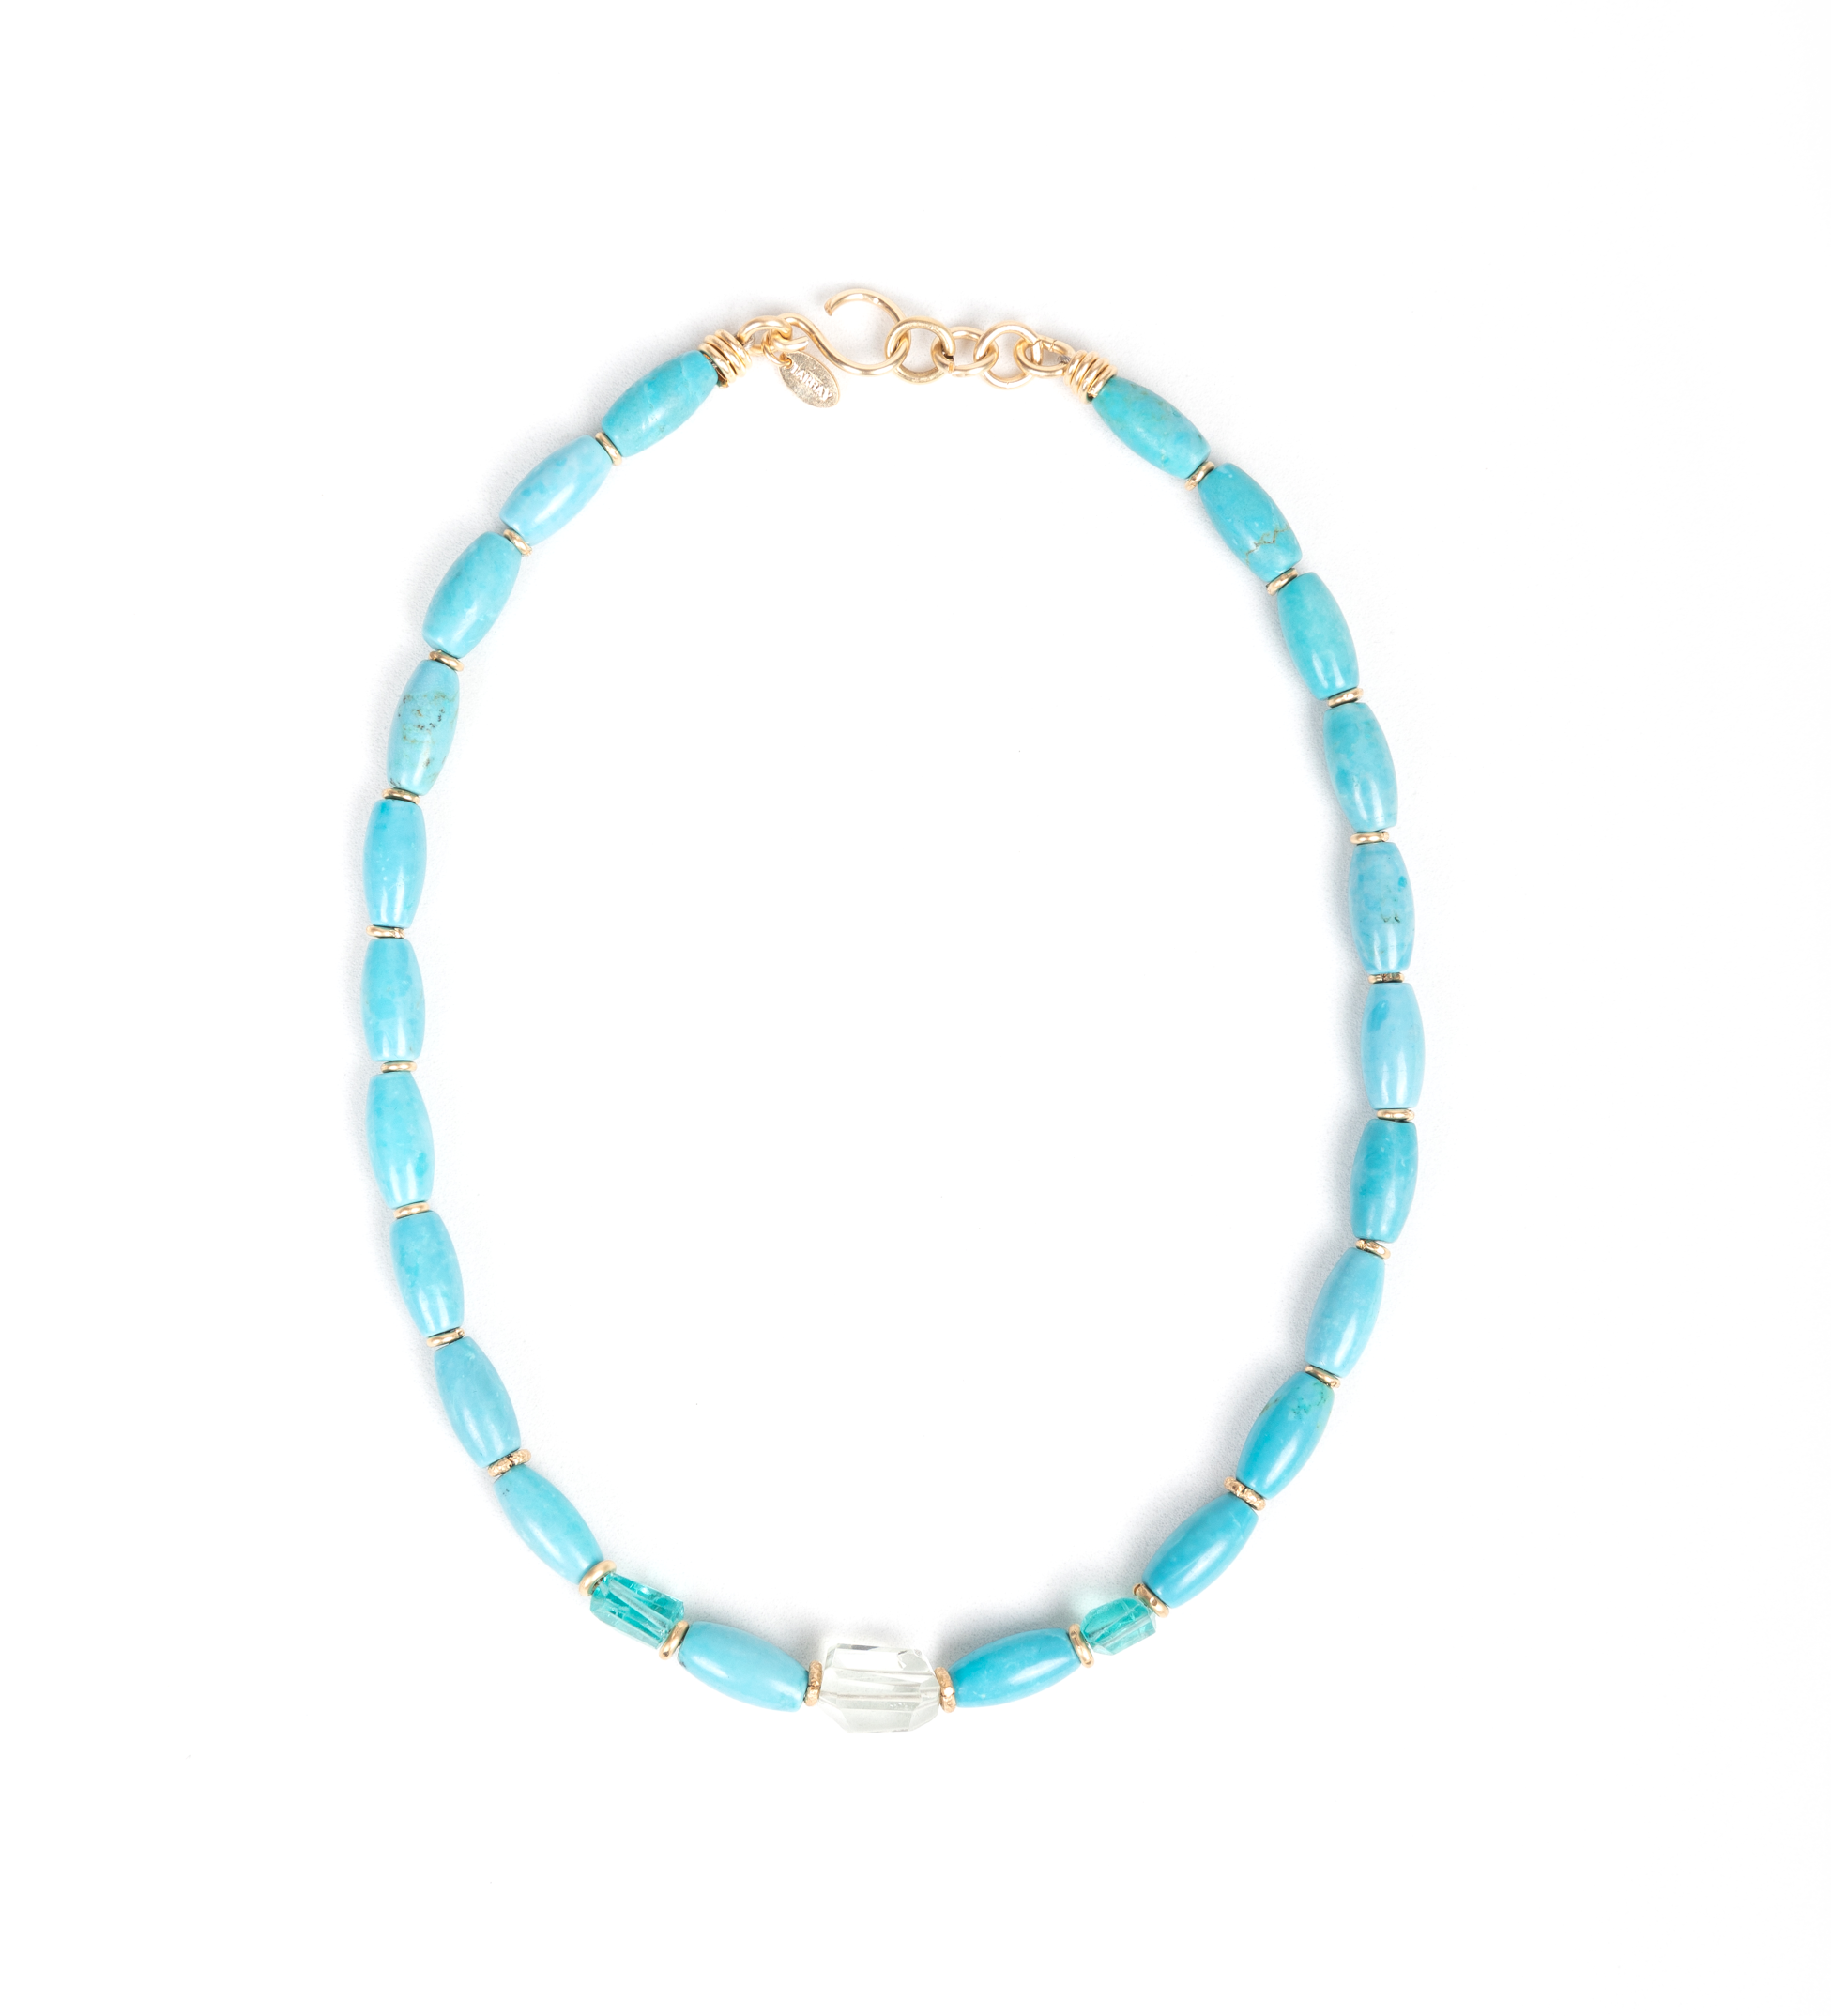 Jacinto Necklace - Turquoise & Apatite Necklaces TARBAY   